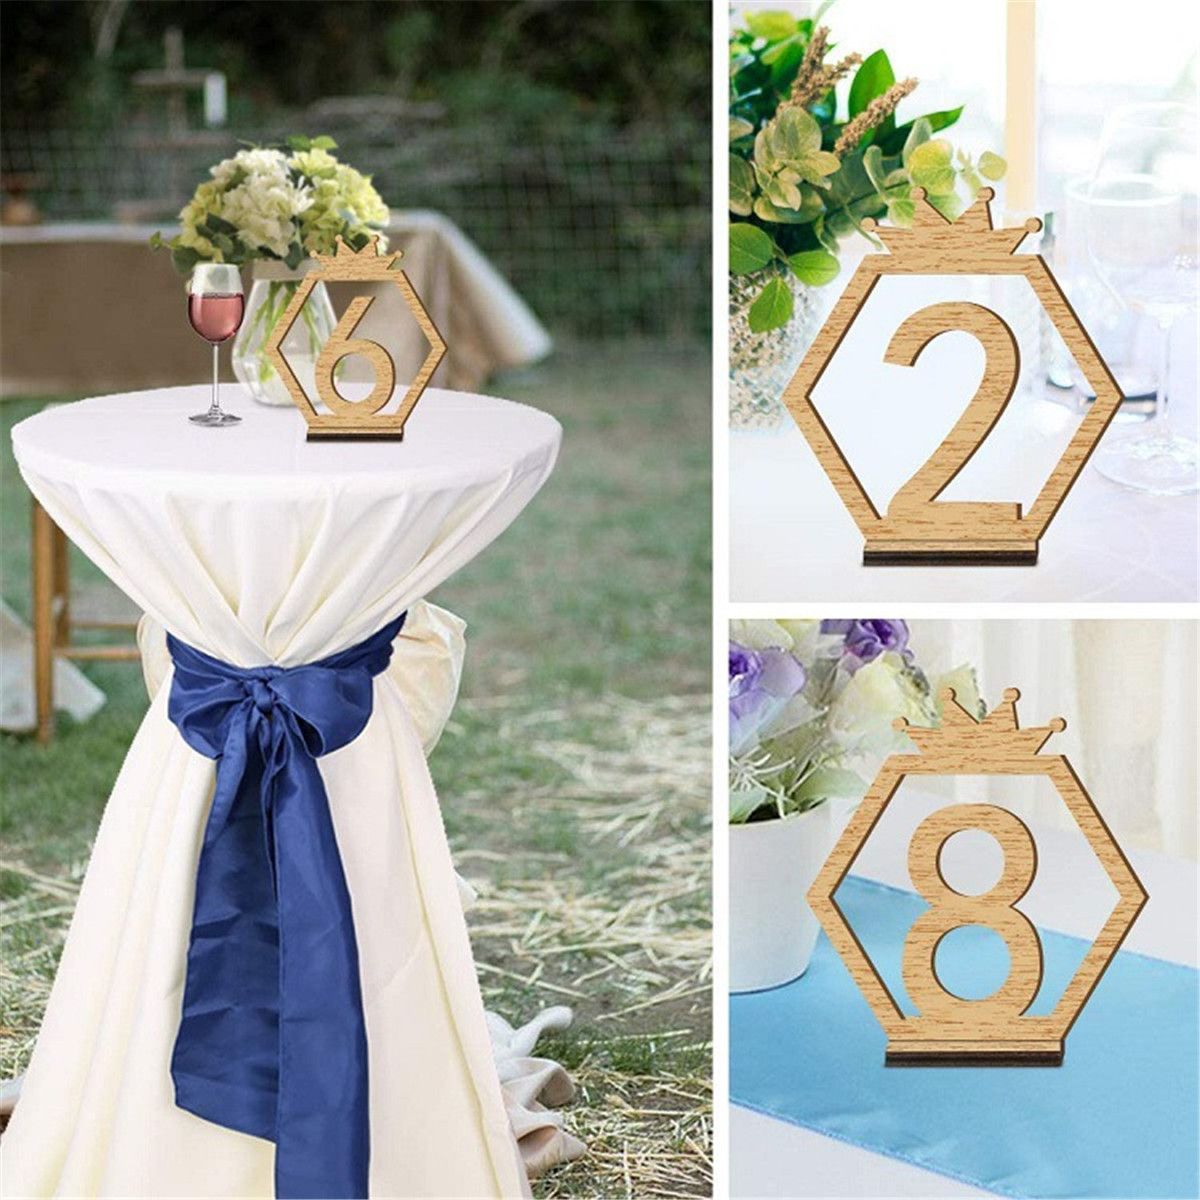 1-20-Signs-Wooden-Table-Numbers-With-Base-Holder-Birthday-Wedding-Party-Decor-1717159